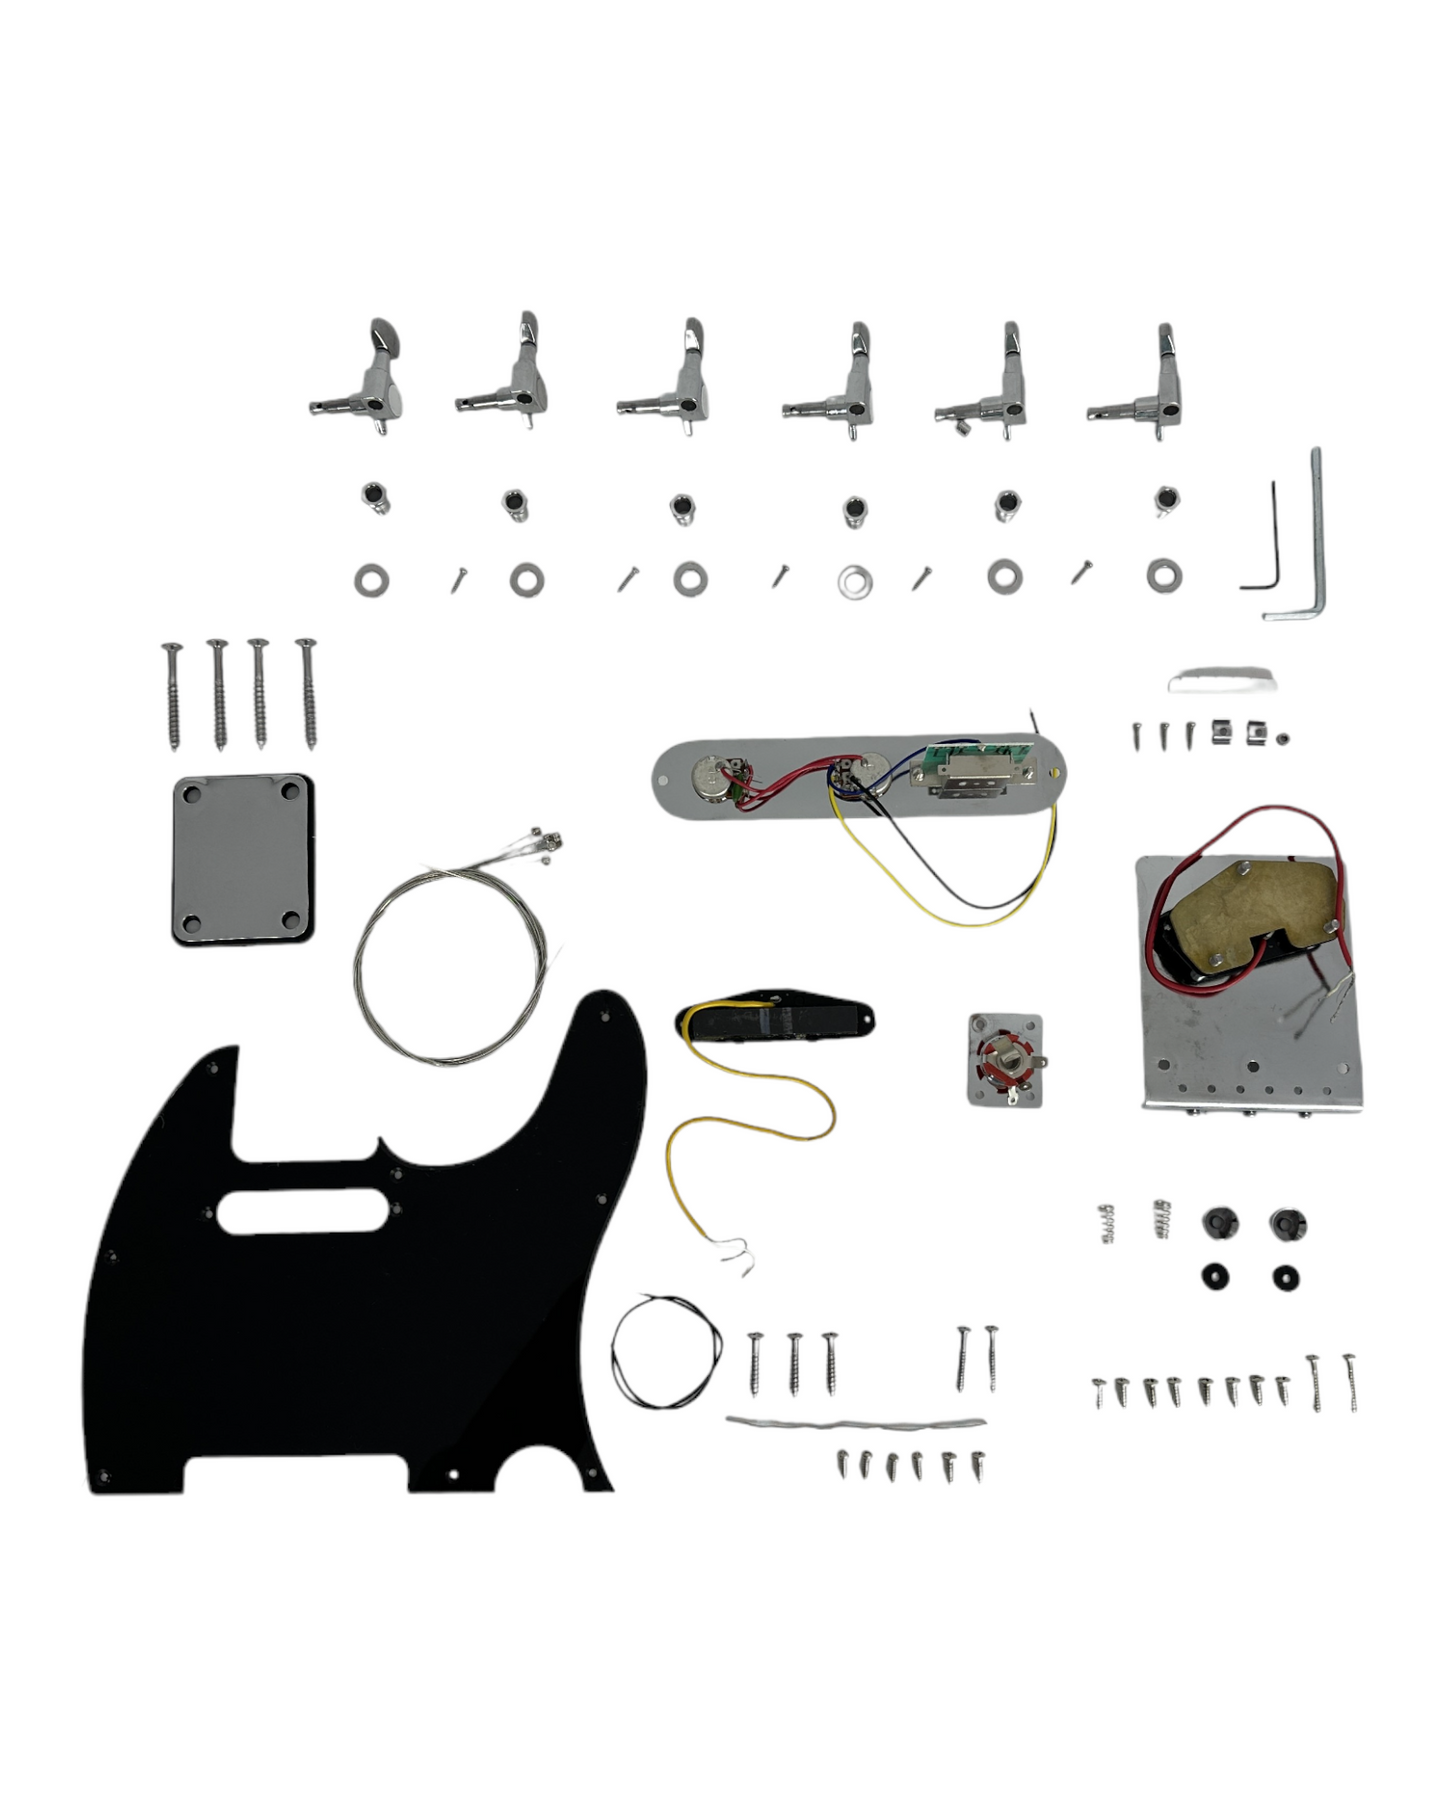 HSTL19100PPCR Full Set Electric Guitar Hardware Accessories Parts